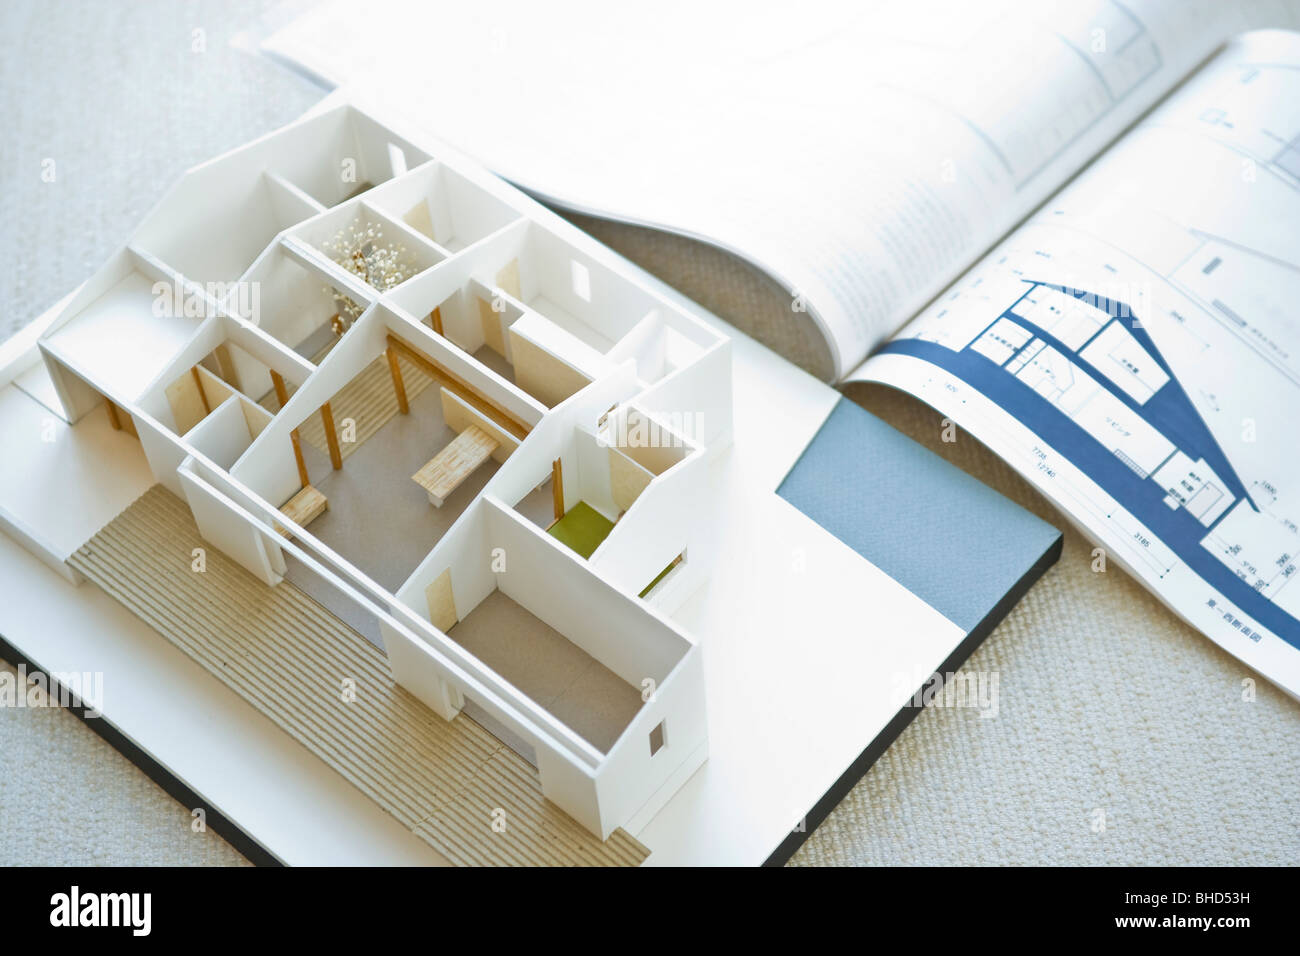 Architectural model with blueprint Stock Photo